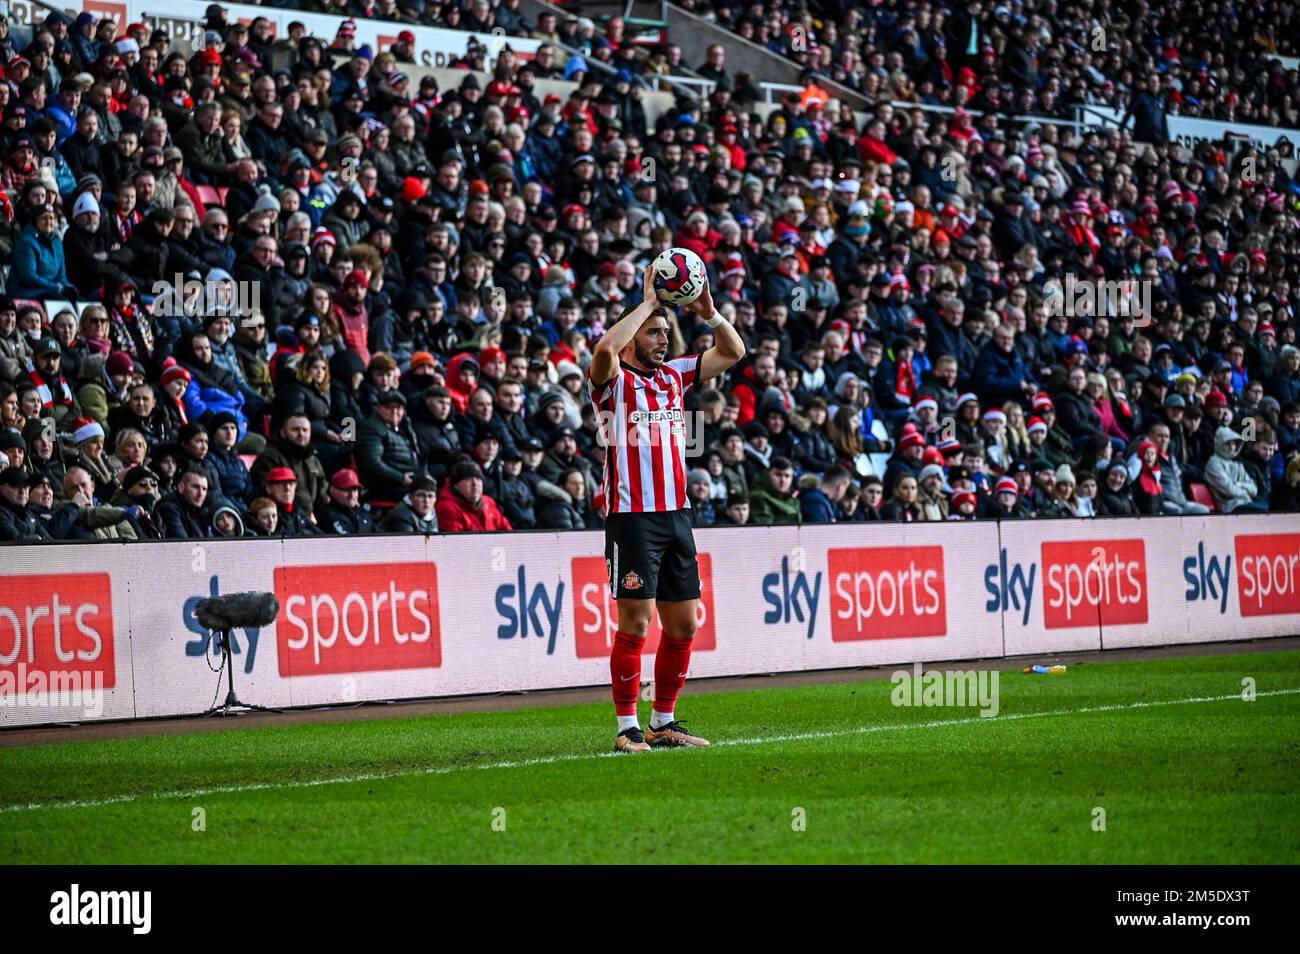 Sunderland AFC defender Lynden Gooch takes a throw in against Blackburn Rovers in the EFL Championship. Stock Photo